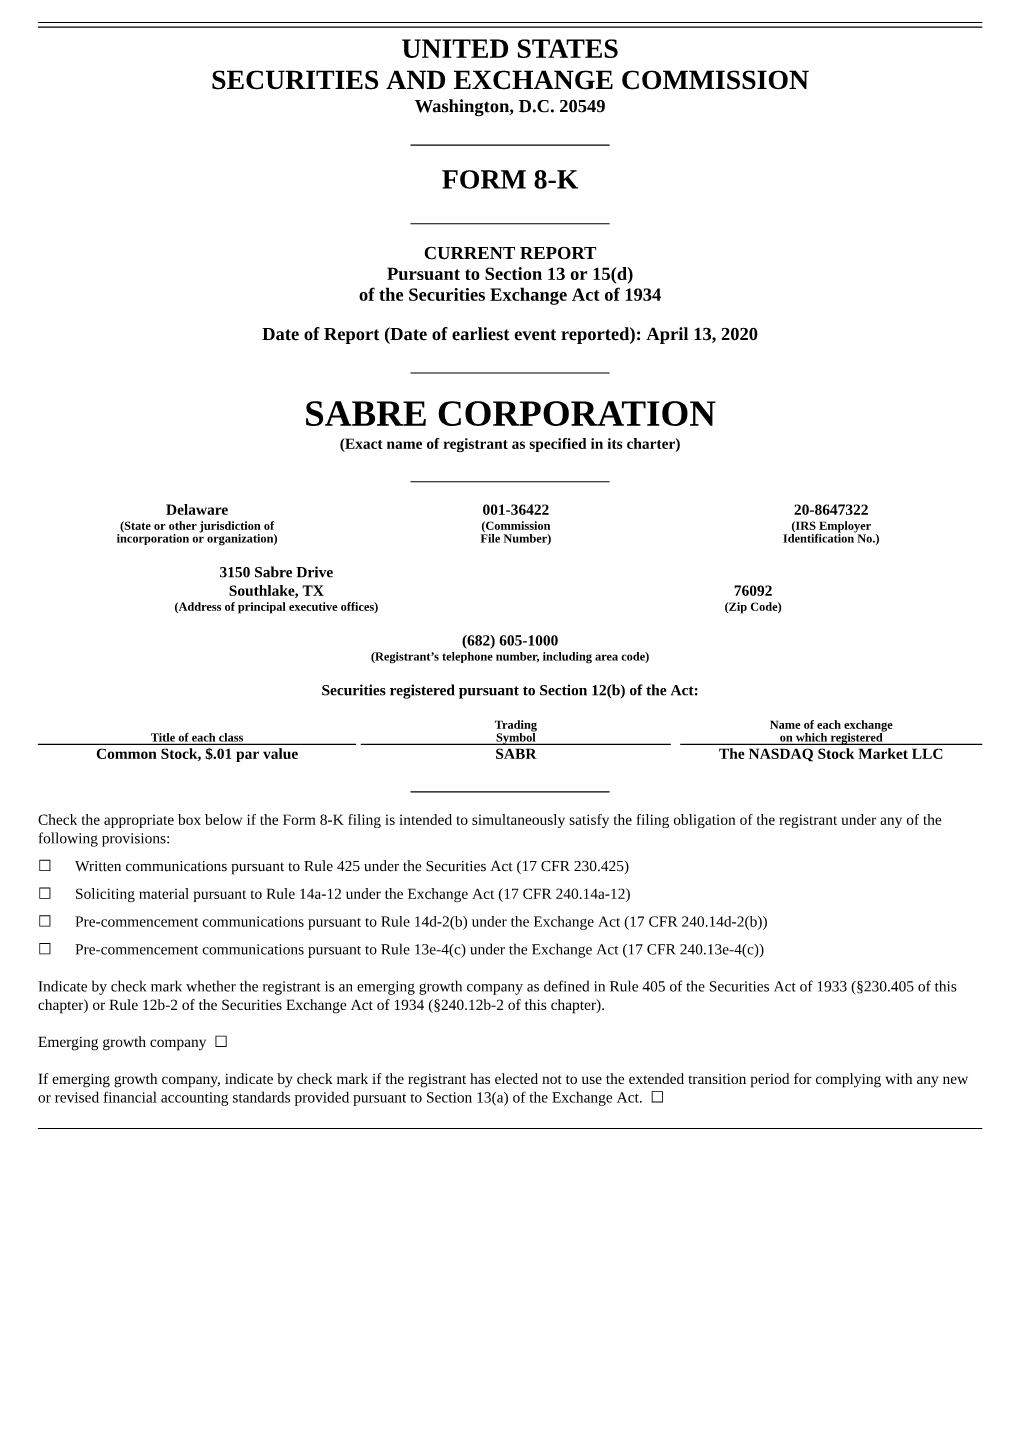 SABRE CORPORATION (Exact Name of Registrant As Specified in Its Charter)